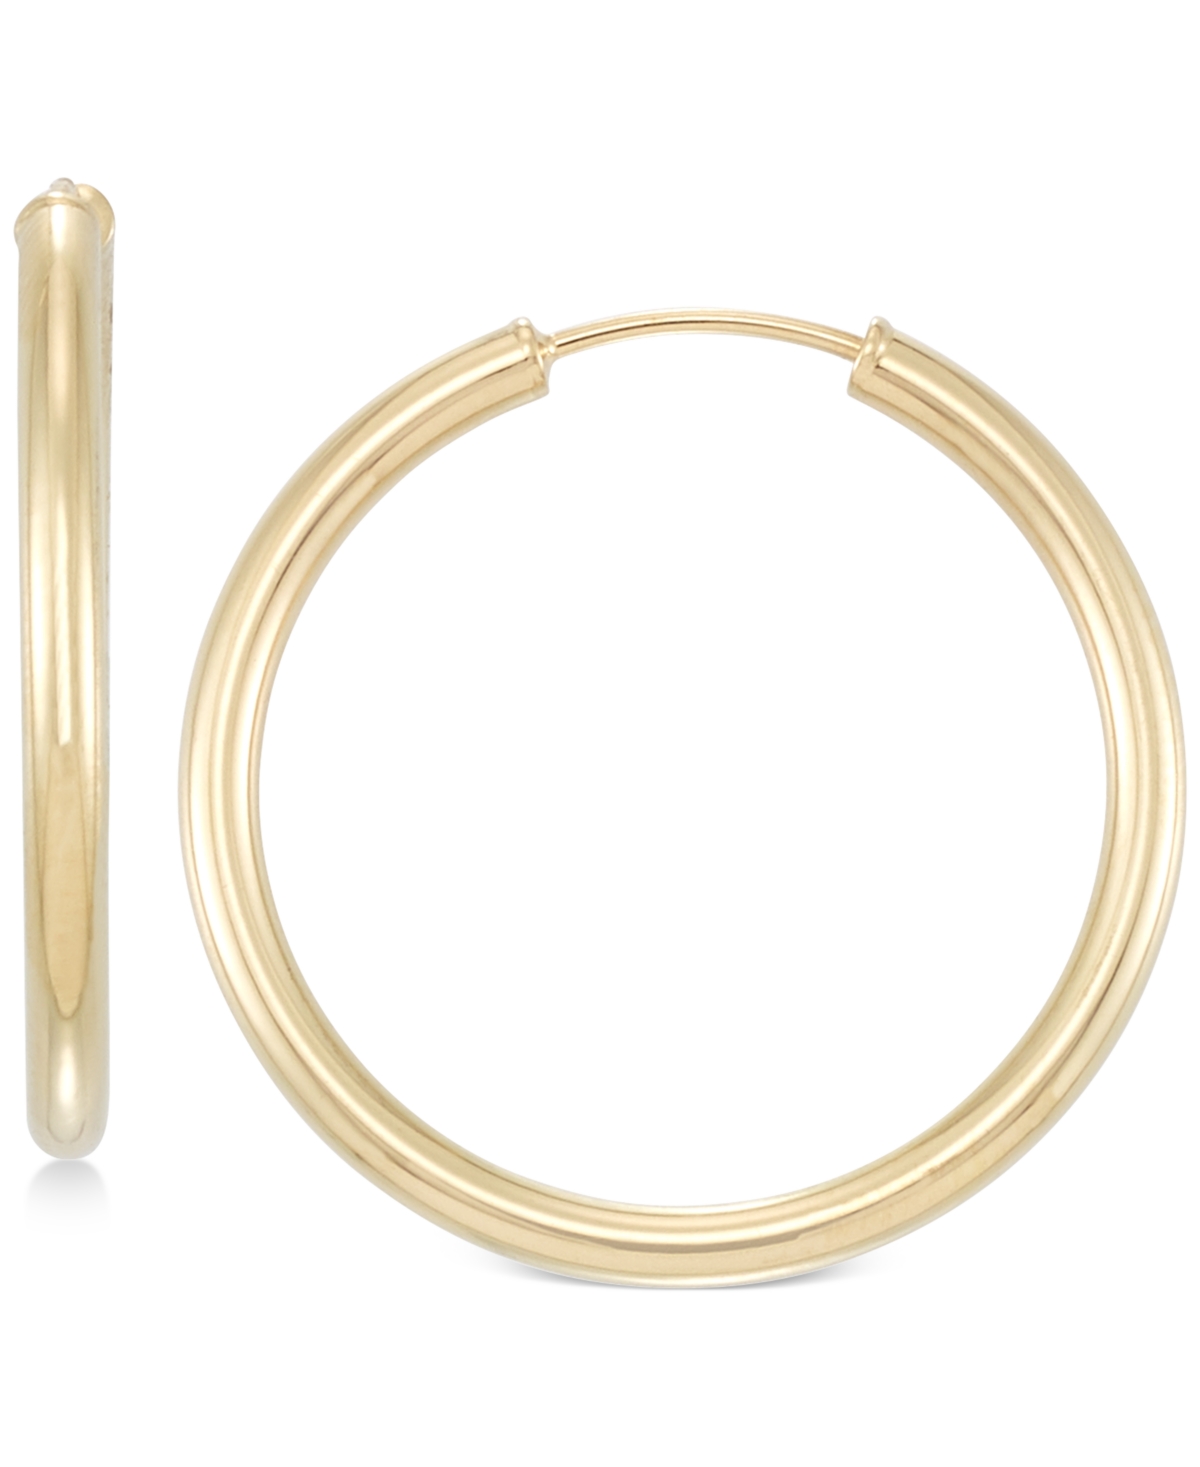 Small Highly Polished Flex Hoop Earrings in 14k Gold - Yellow Gold